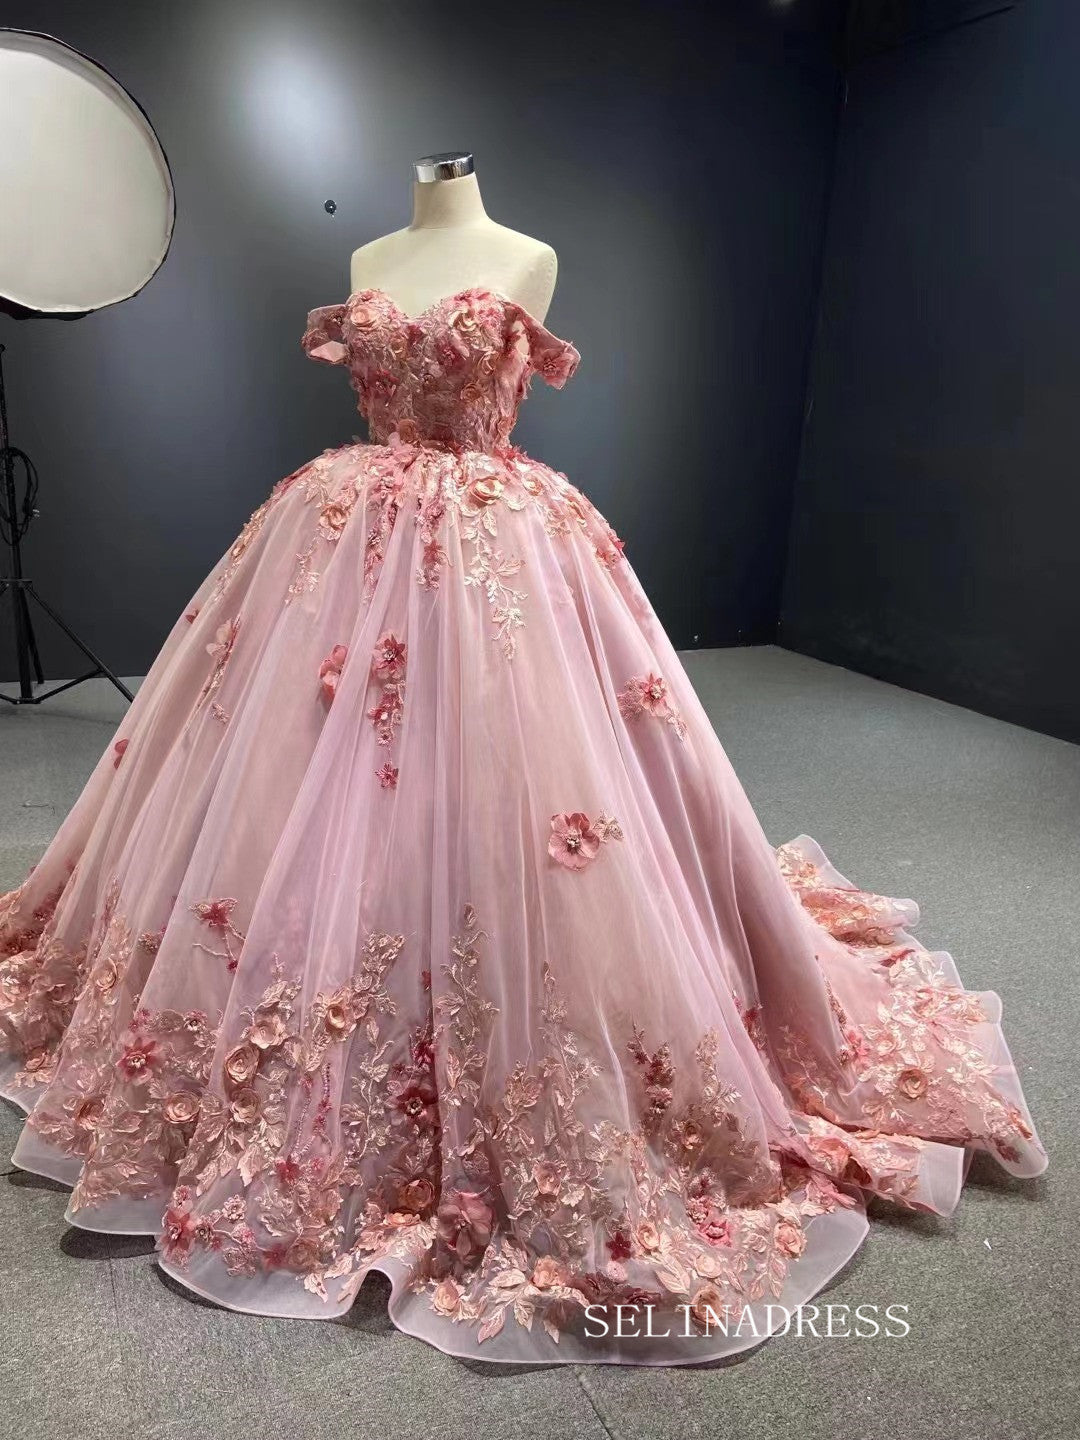 2023 New Elegant Pink Sequin Beaded Halter Celebrity Wedding Dresses 2022  With Tassel Sleeves Perfect For Prom, Evening Events, And Special Occasions  From Uniqueeveningdress, $89.28 | DHgate.Com